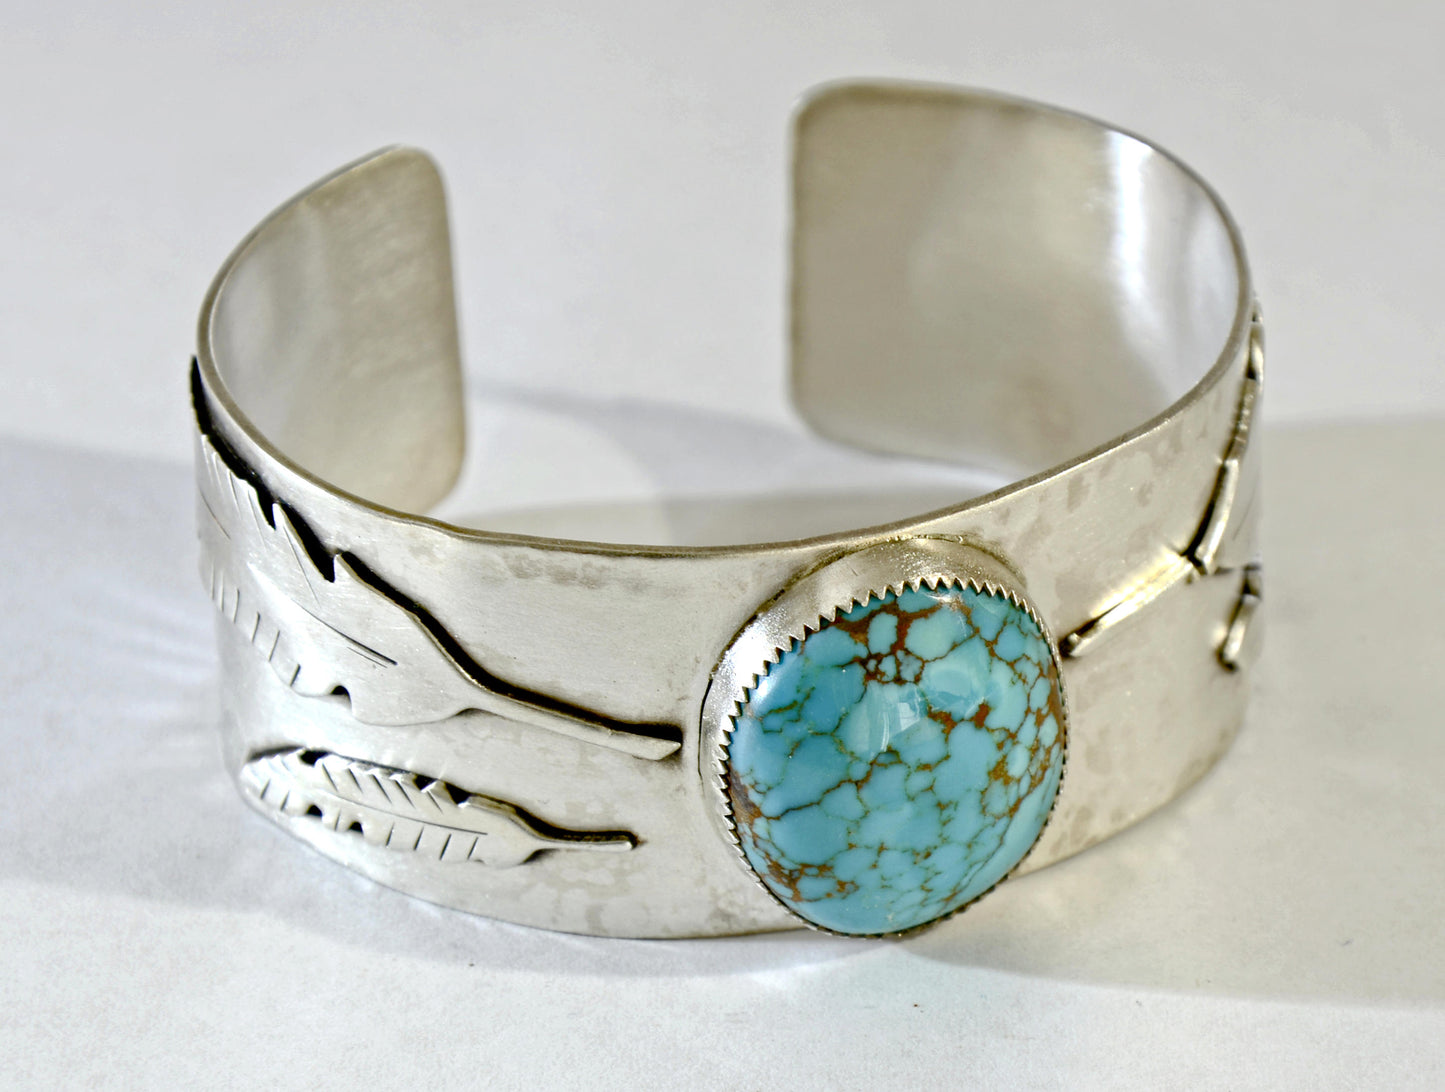 Giant Turquoise Stone with Leaf Motif Design on Sterling Silver Cuff Bracelet